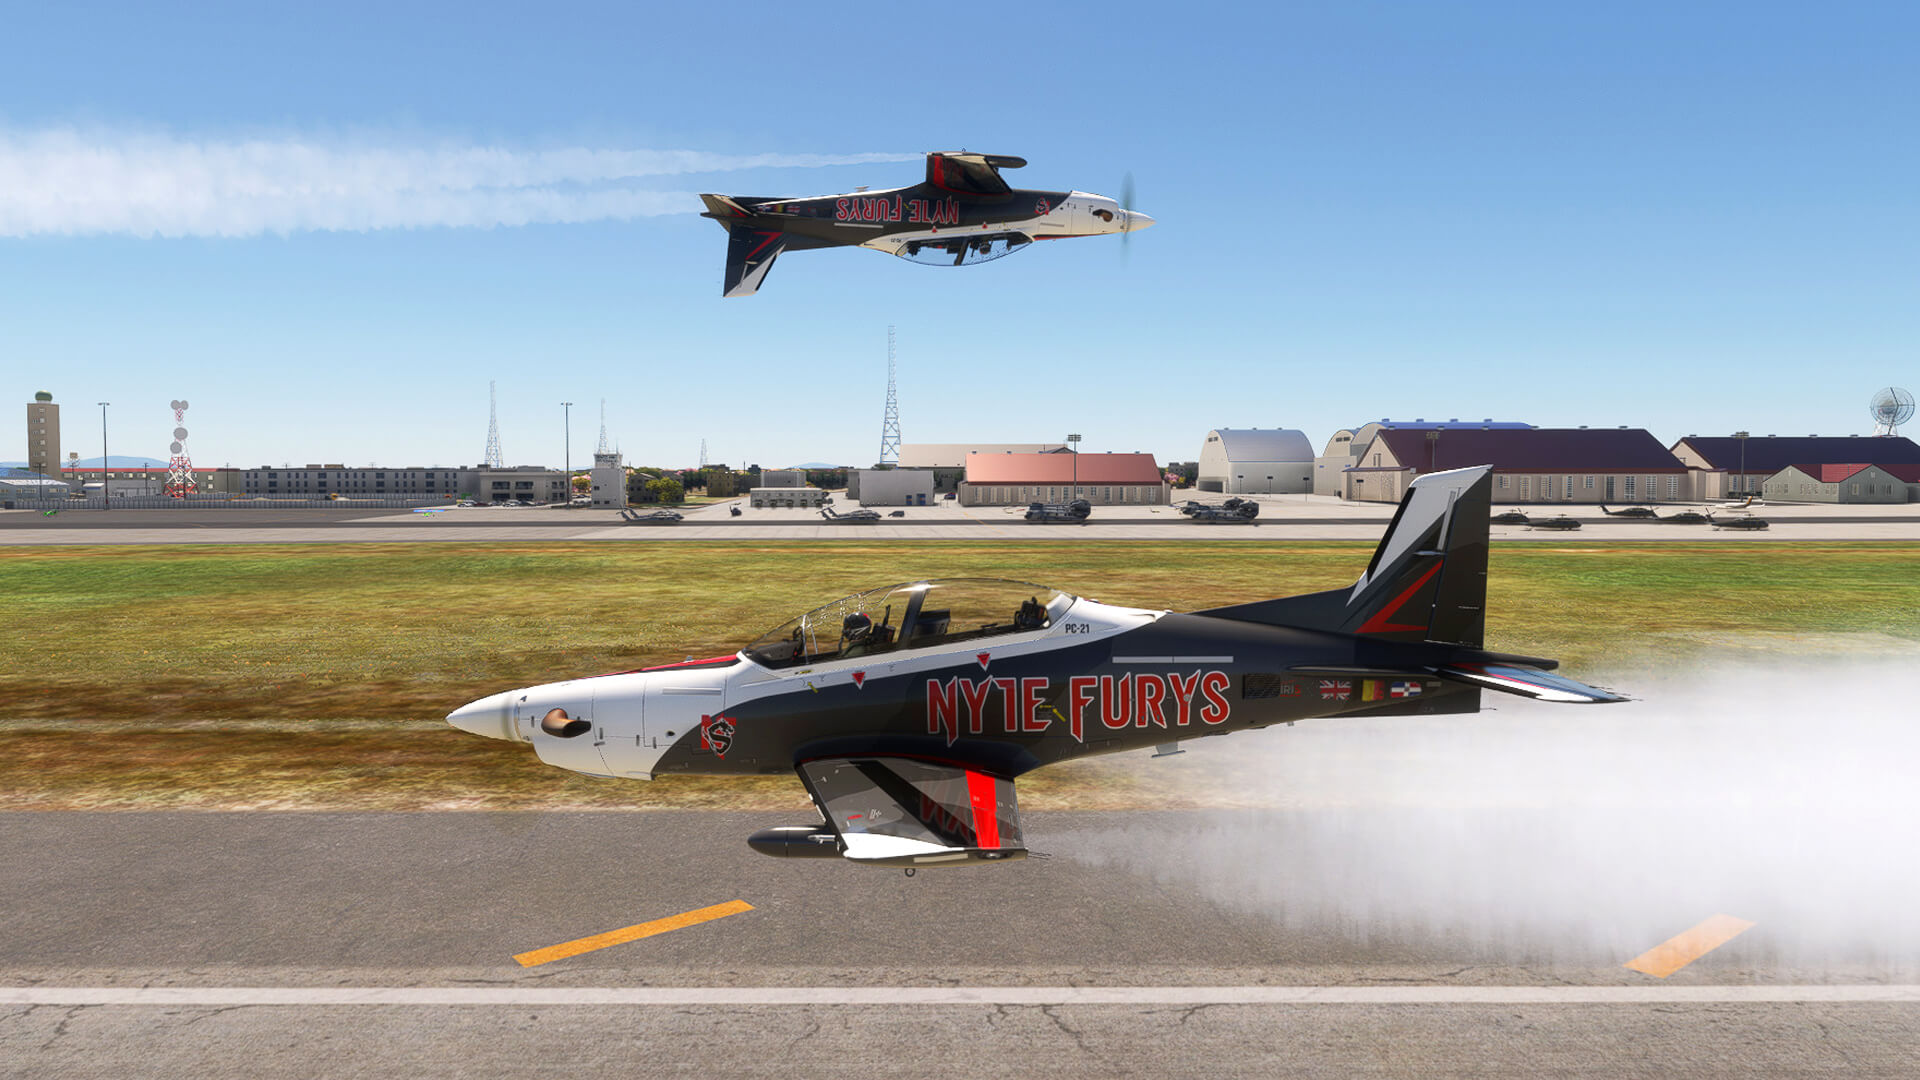 Two acrobatic aircraft in "Nyte Furys" livery pass each other with smoke on, with one inverted.